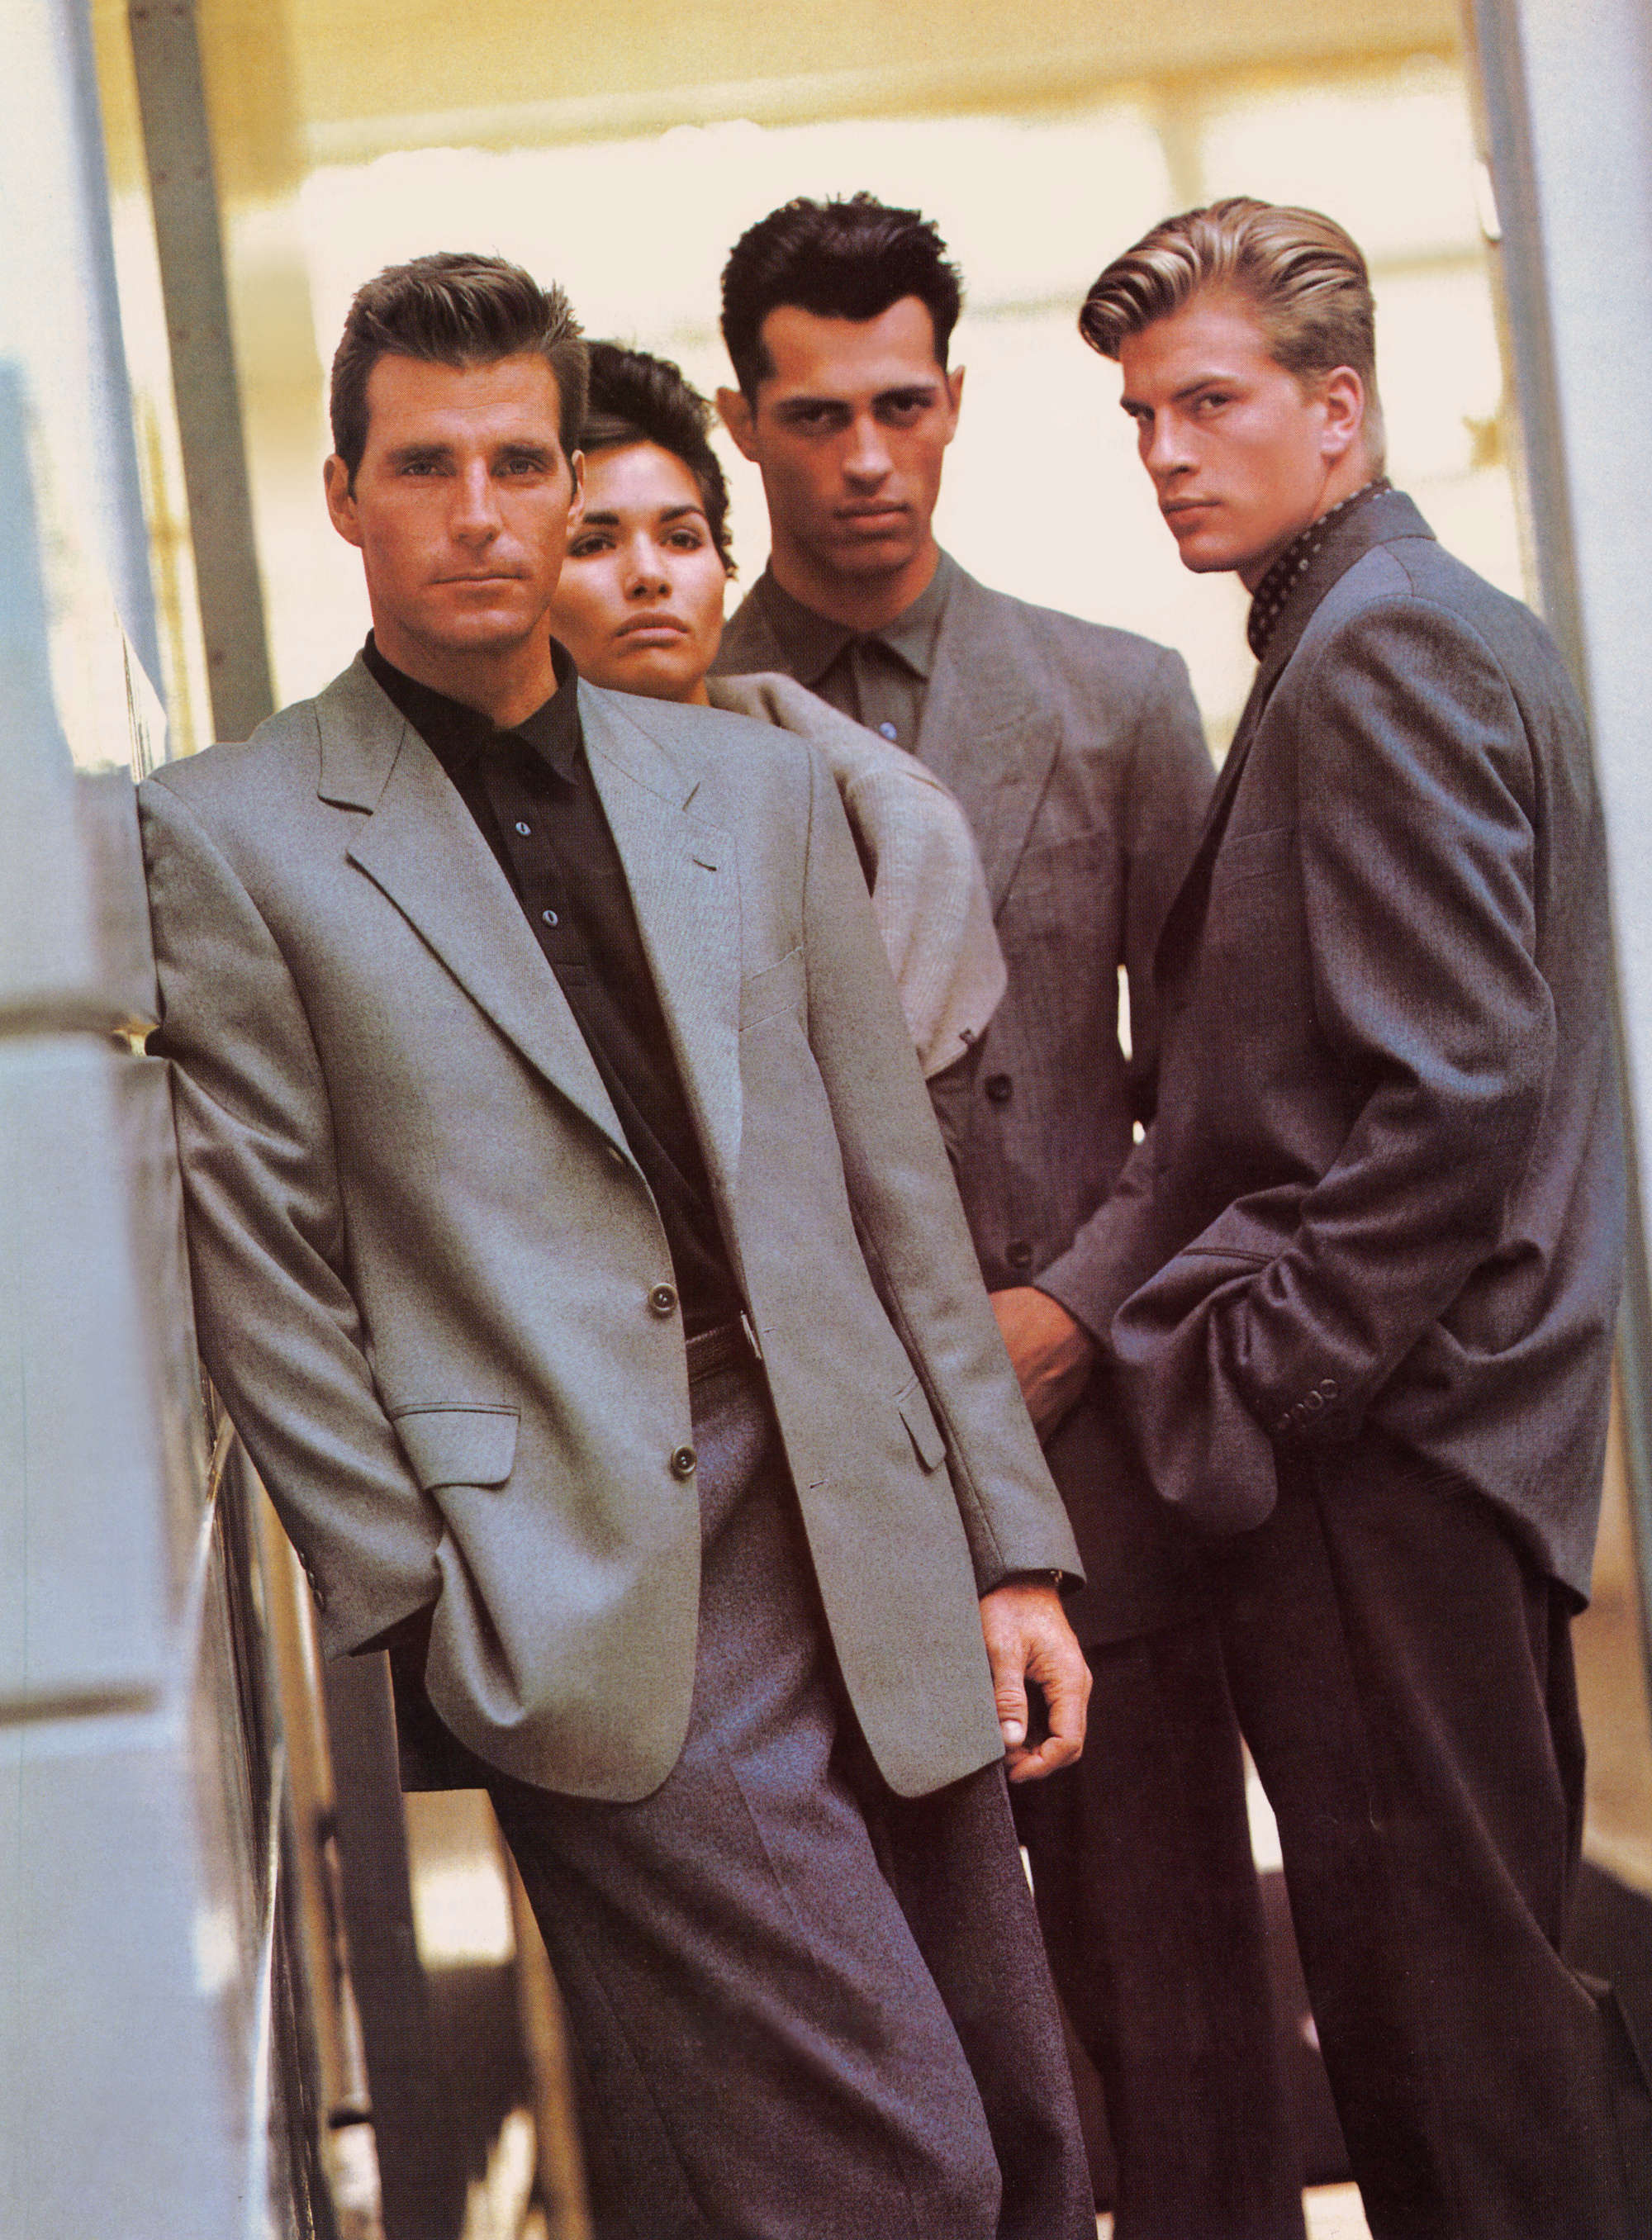 Bekostning i live håndtering How broad shoulders carried men's fashion through the 80s | fashion |  Agenda | Phaidon